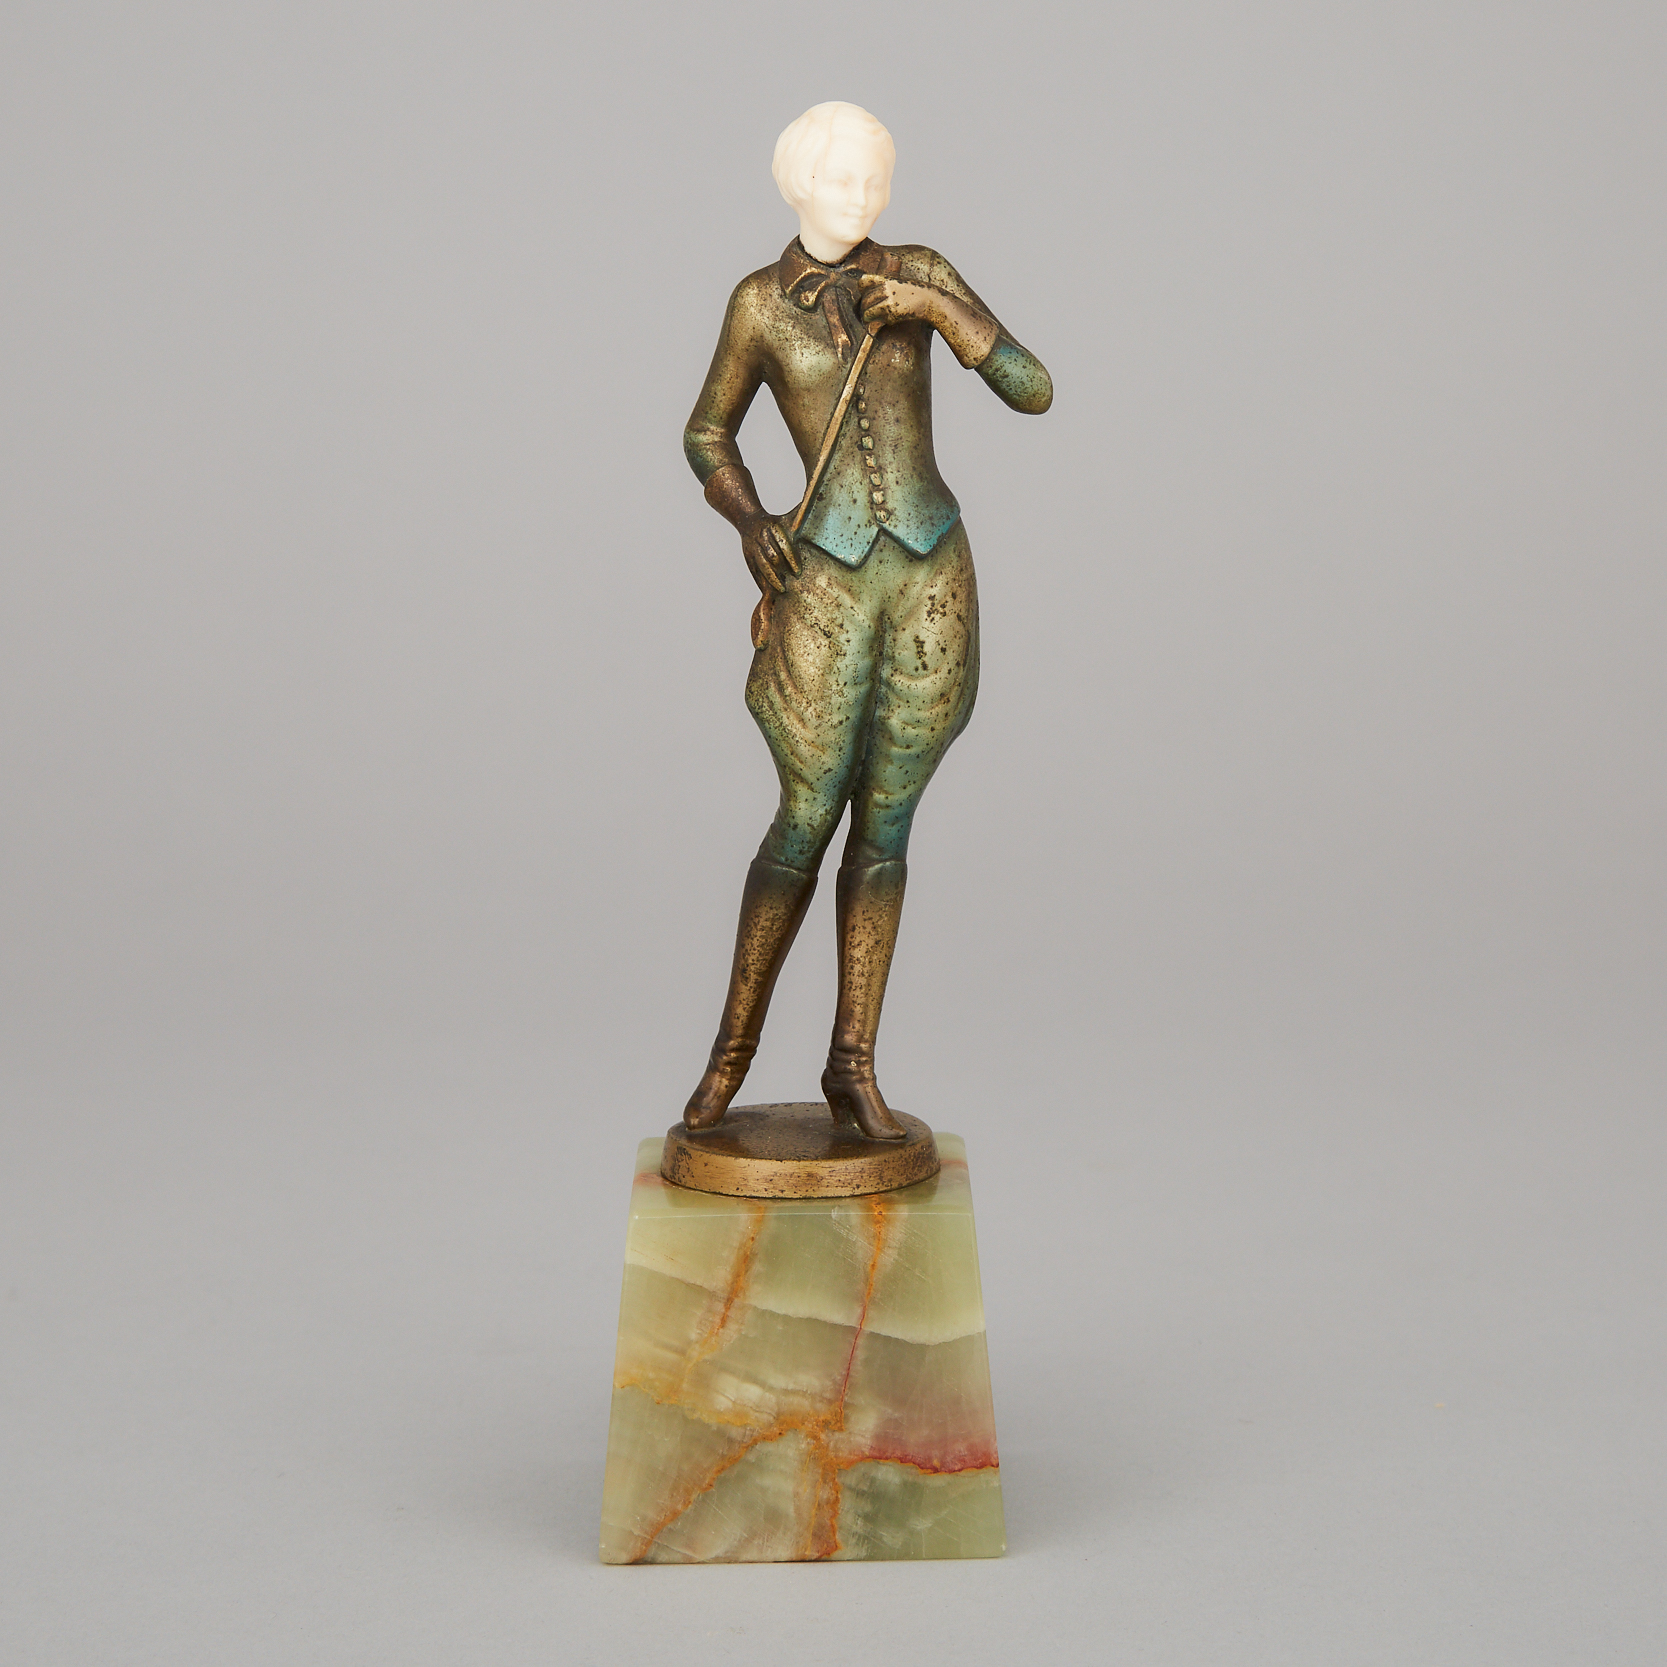 French Art Deco Figure of a Young Woman in a Riding Habit with Crop, c.1925